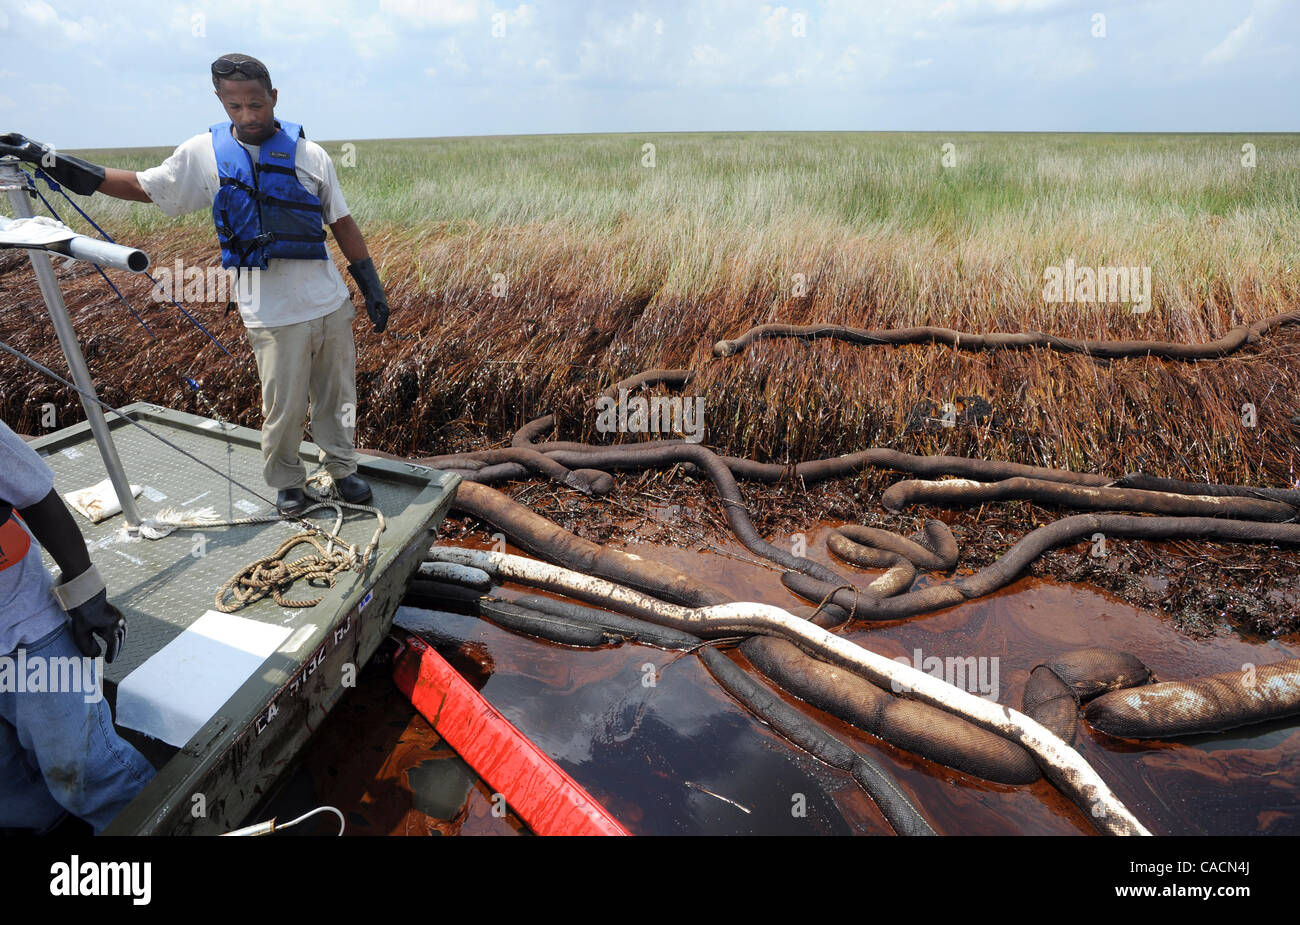 June 20, 2010 - Port Sulphur, LOUISIANA, U.S. - Plaquemines Parish employee Garland Ingraham takes a break from using a portable vacuum to suck up thick crude oil from the BP Deepwater Horizon oil spill in the Bay Jimmy marsh section of Barataria Bay near Port Sulphur, Louisiana, USA 20 June 2010. P Stock Photo